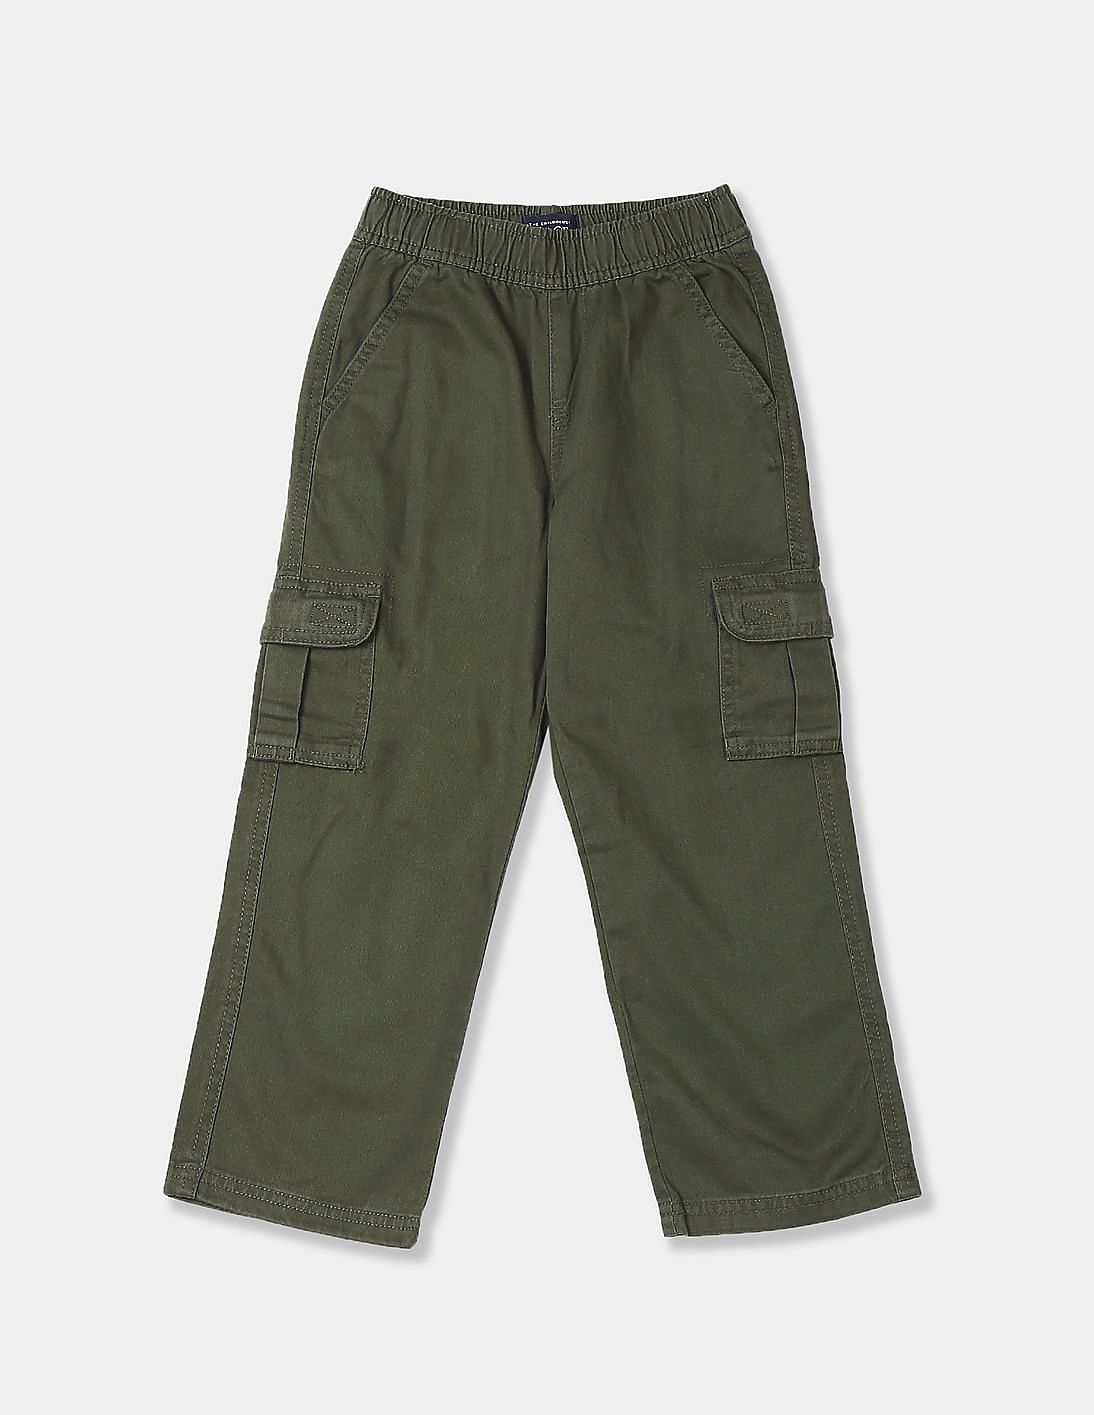 Buy The Children's Place Boys Green Pull-On Cargo Pants - NNNOW.com